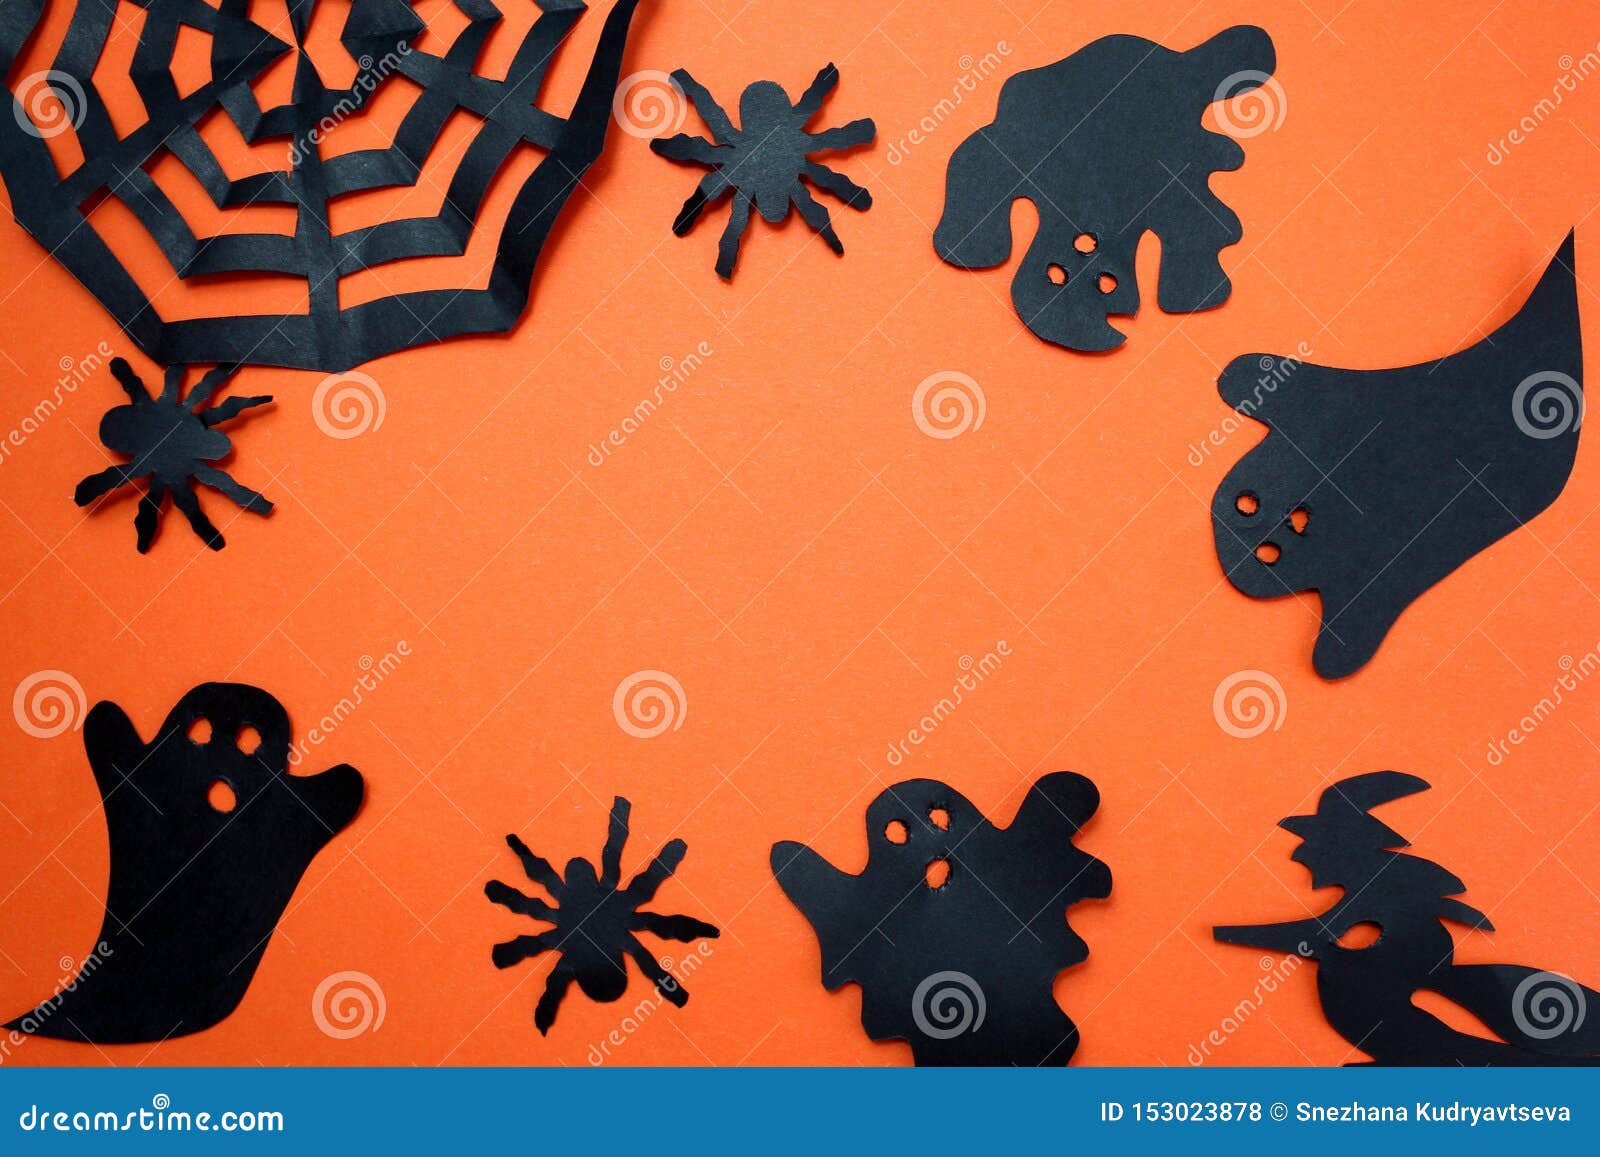 Spider, Bats, Ghosts. Design for Festive Decoration. Halloween Holiday Mood  Stock Photo - Image of creativity, halloween: 153023878